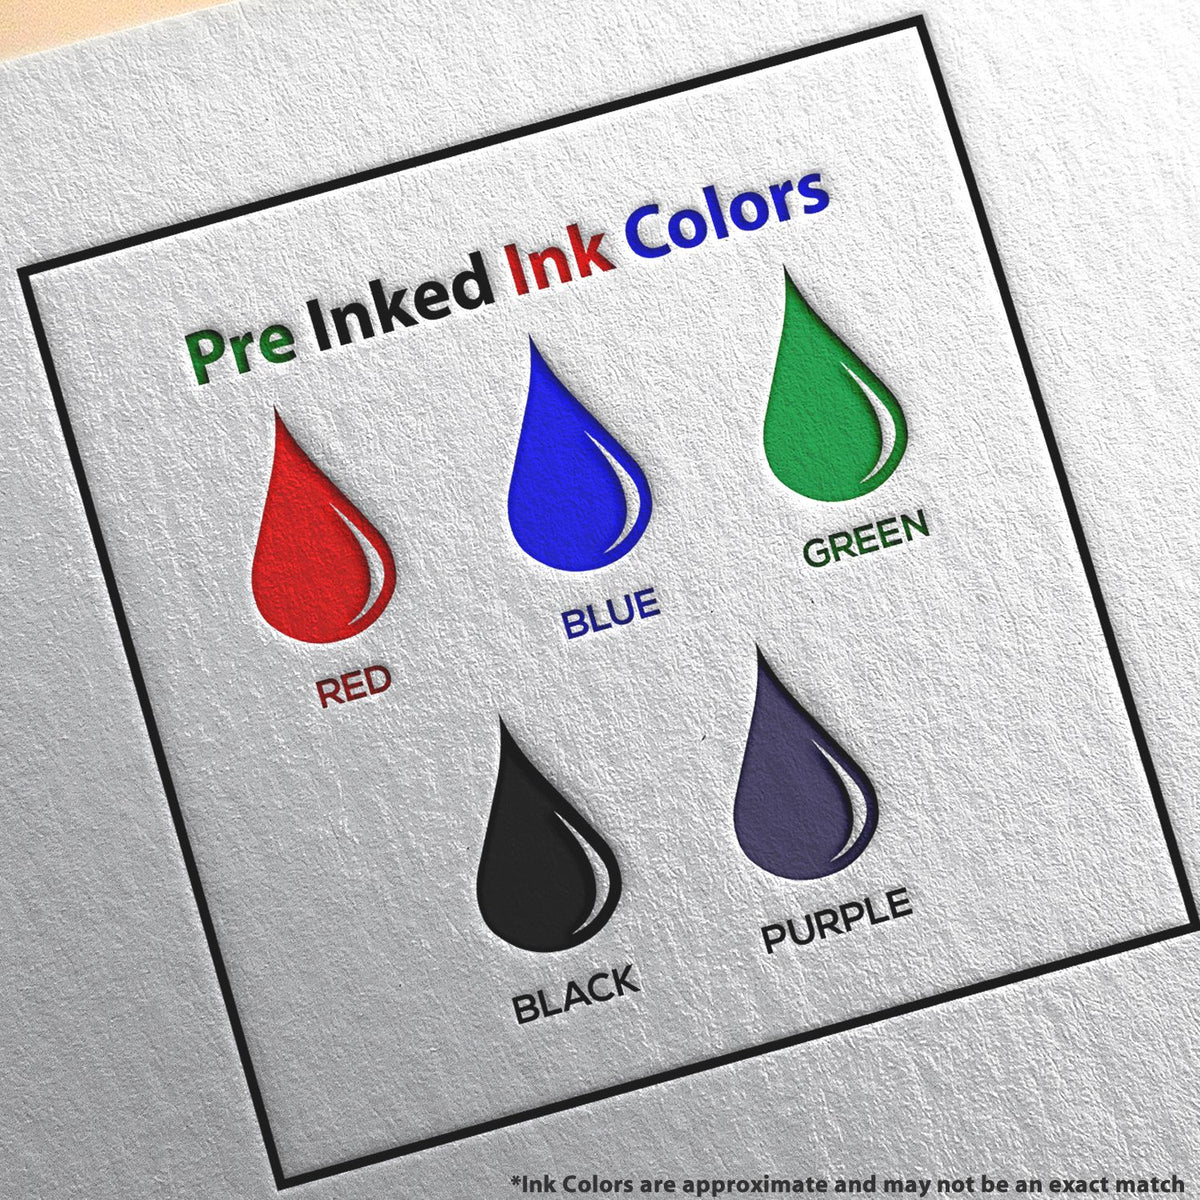 A picture showing the different ink colors or hues available for the Slim Pre-Inked Idaho Professional Engineer Seal Stamp product.